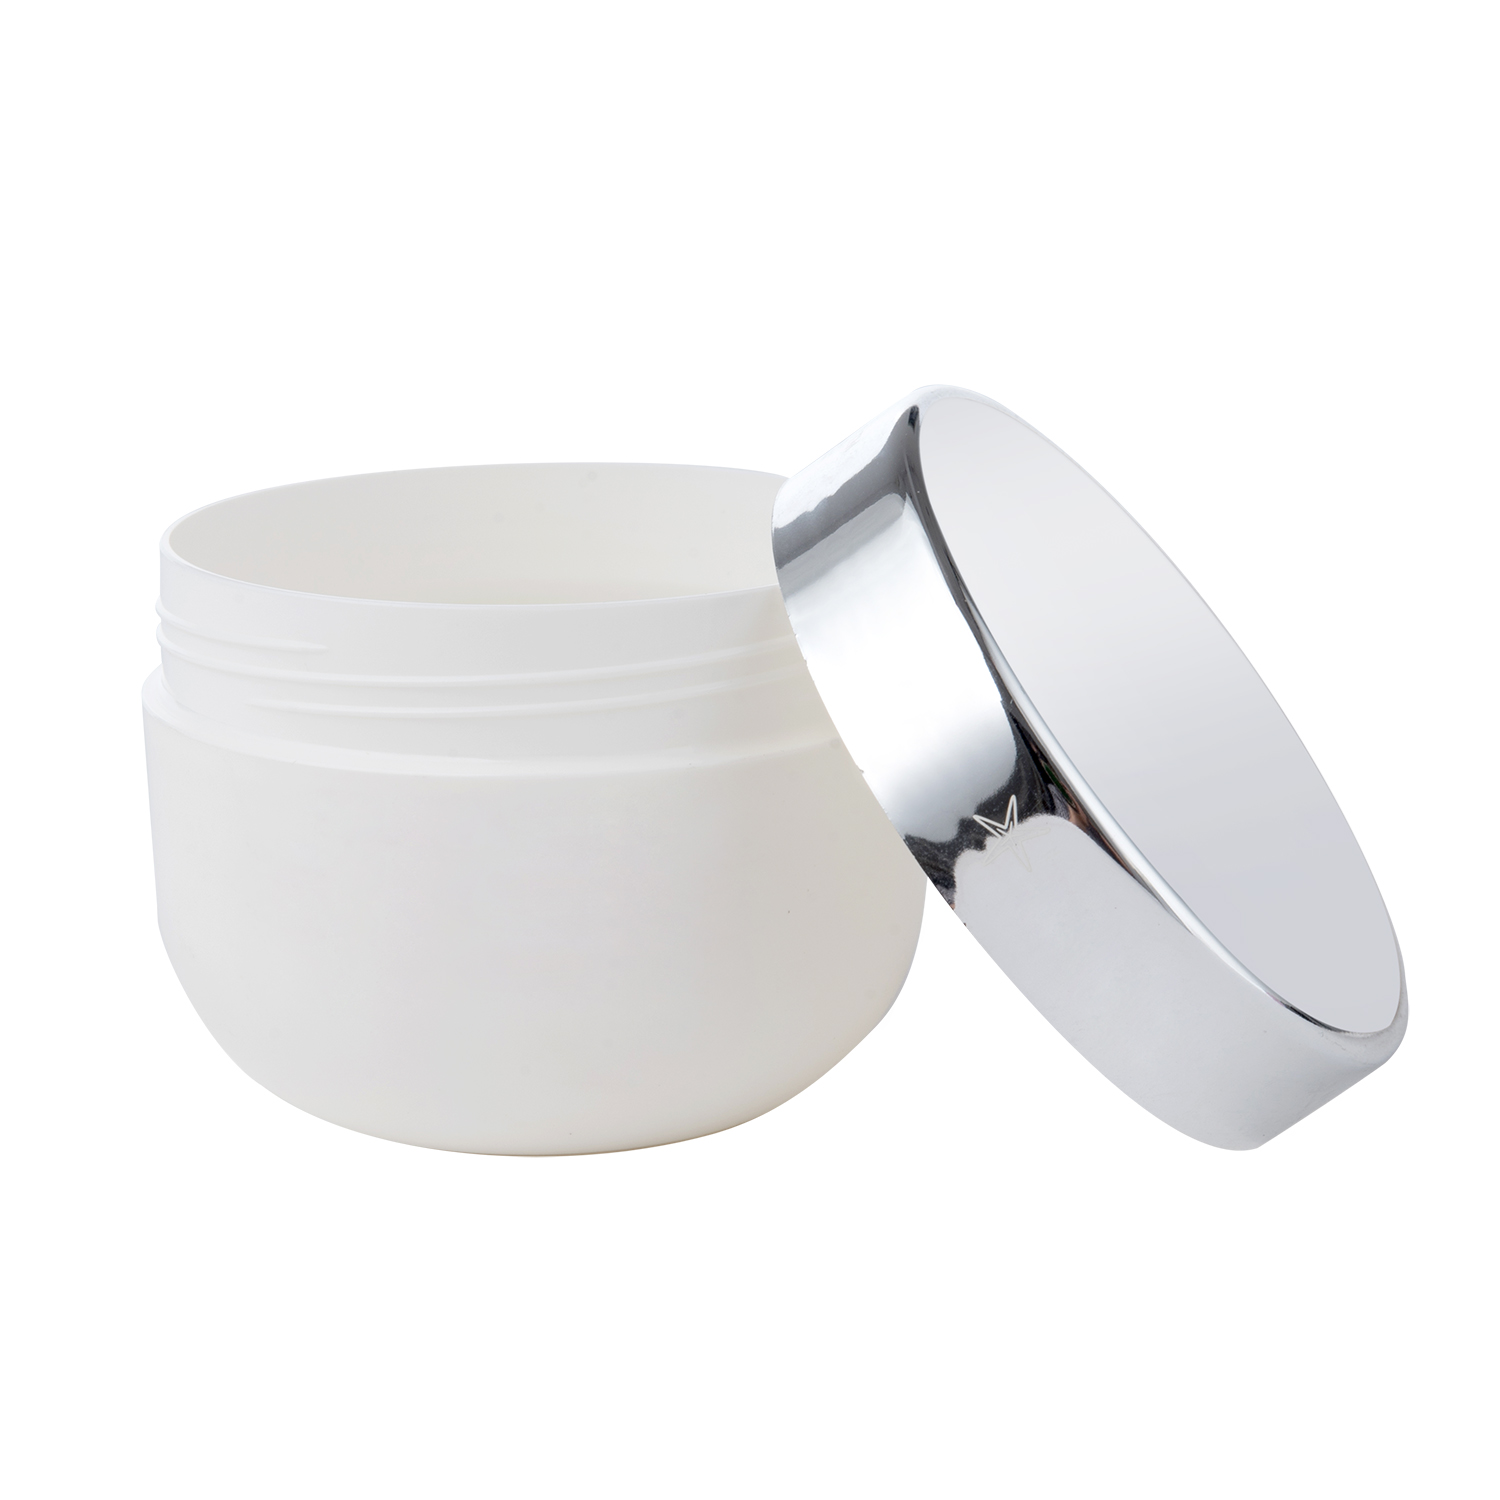 500ml White Body Cream Butter PP Recycled Cosmetic Jar